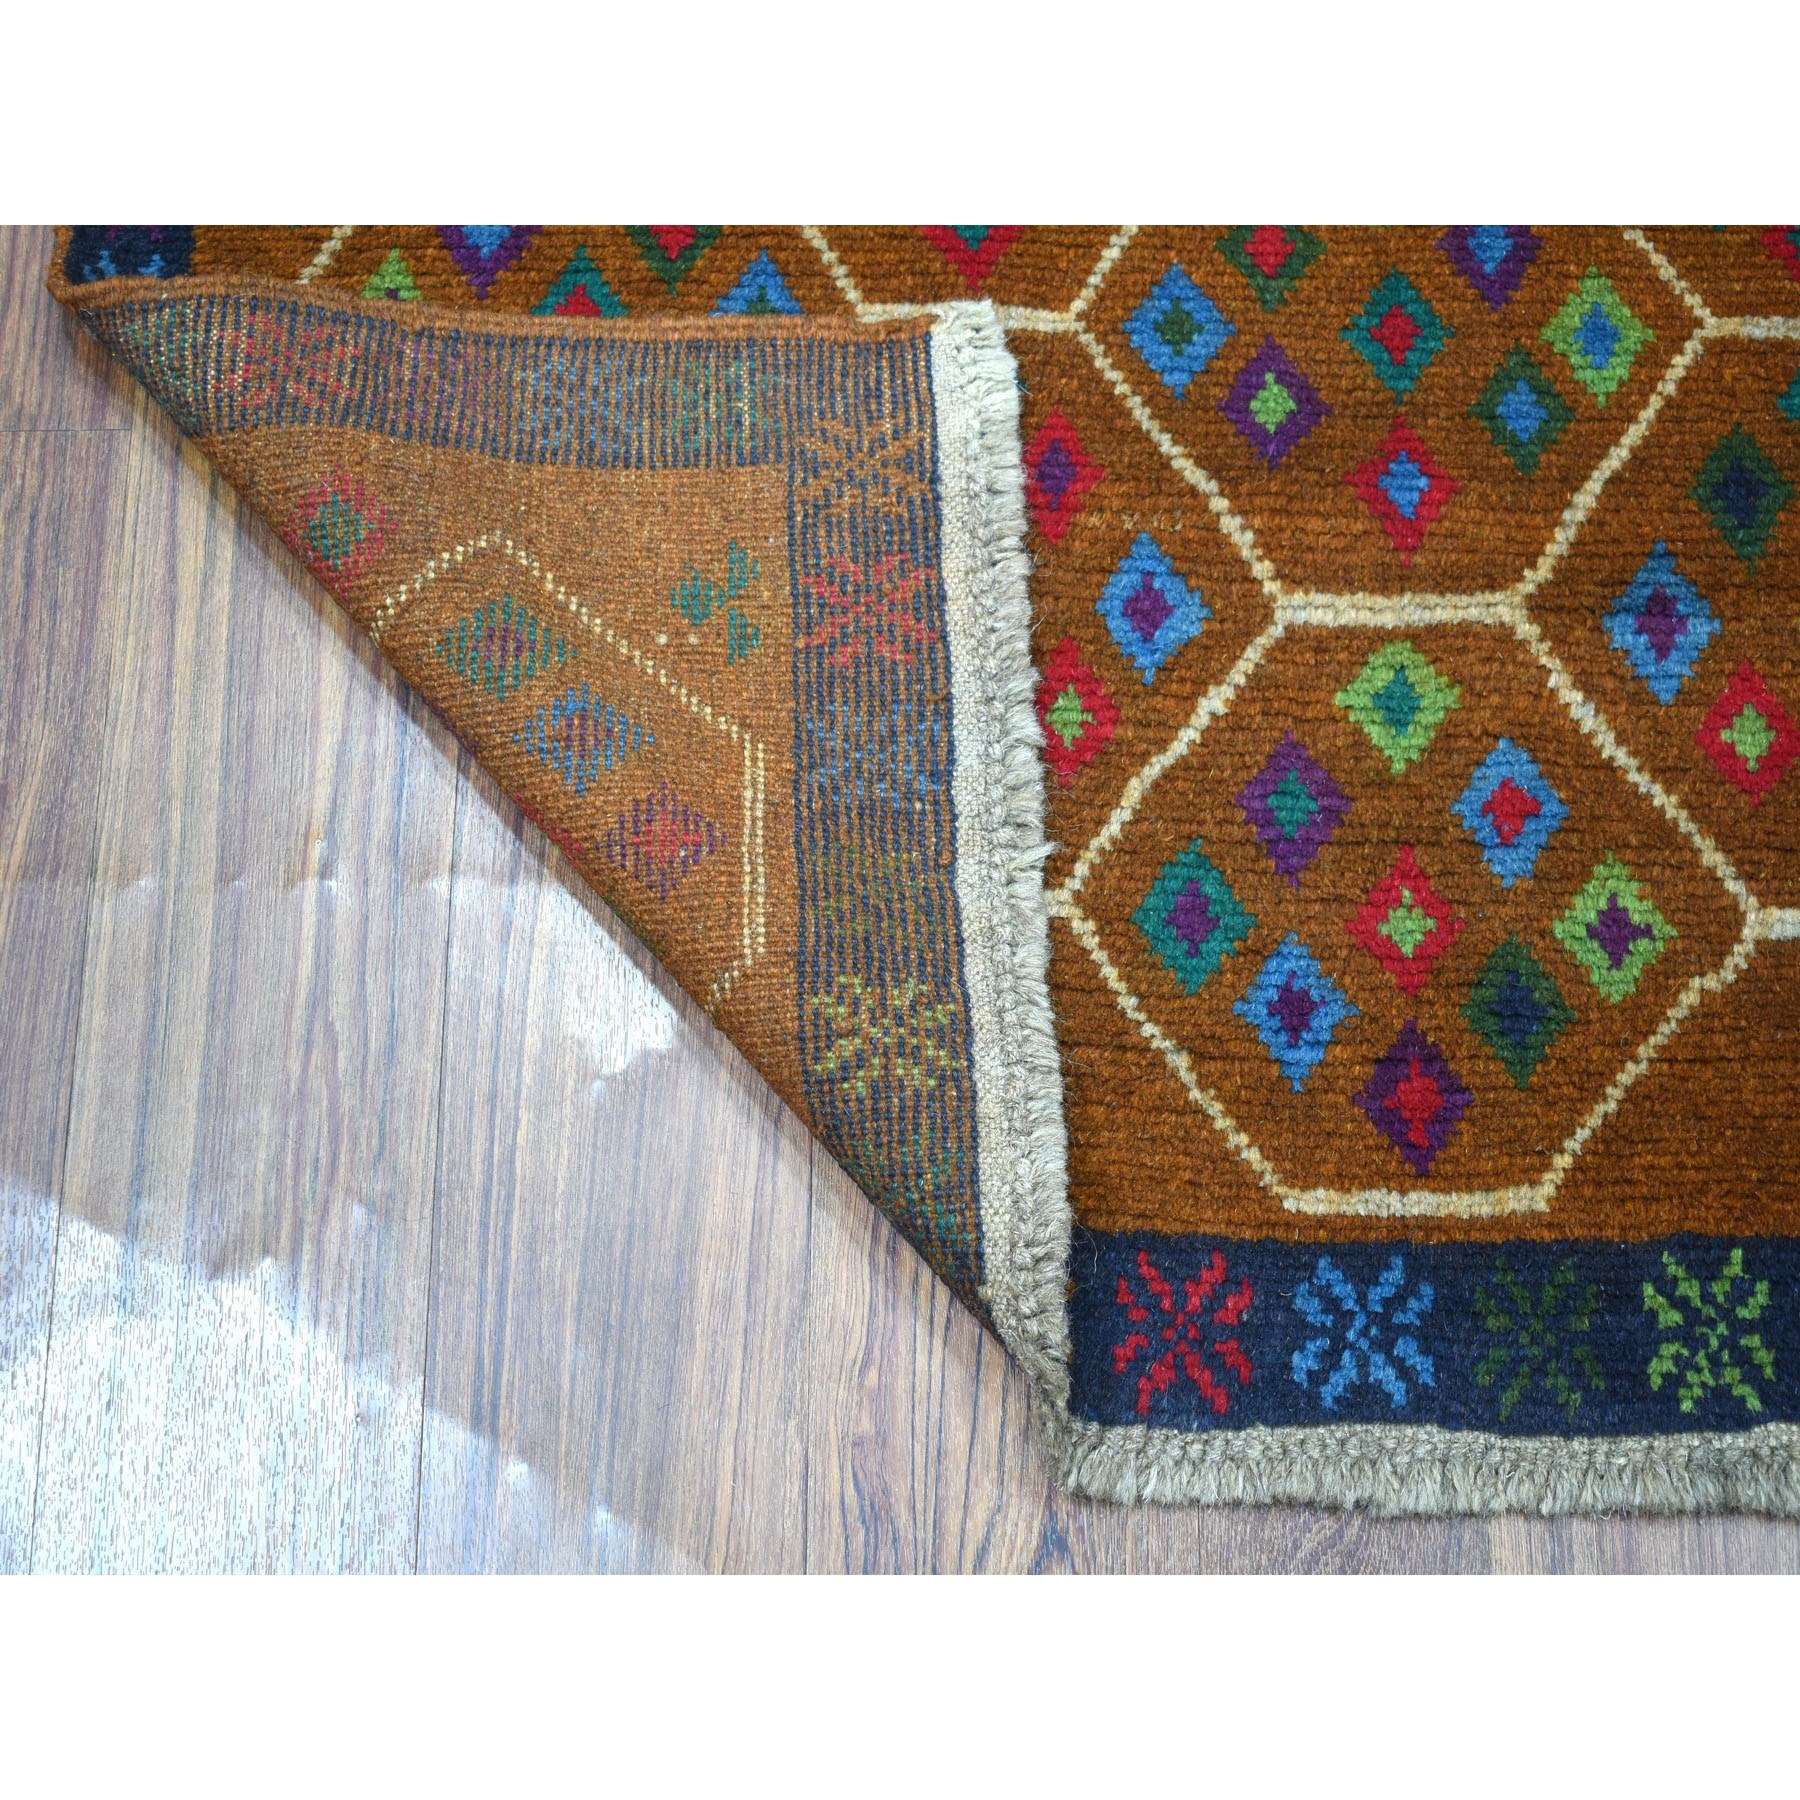 4-x6- Brown Colorful Afghan Baluch Tribal Design Hand Knotted 100% Wool Oriental Rug 